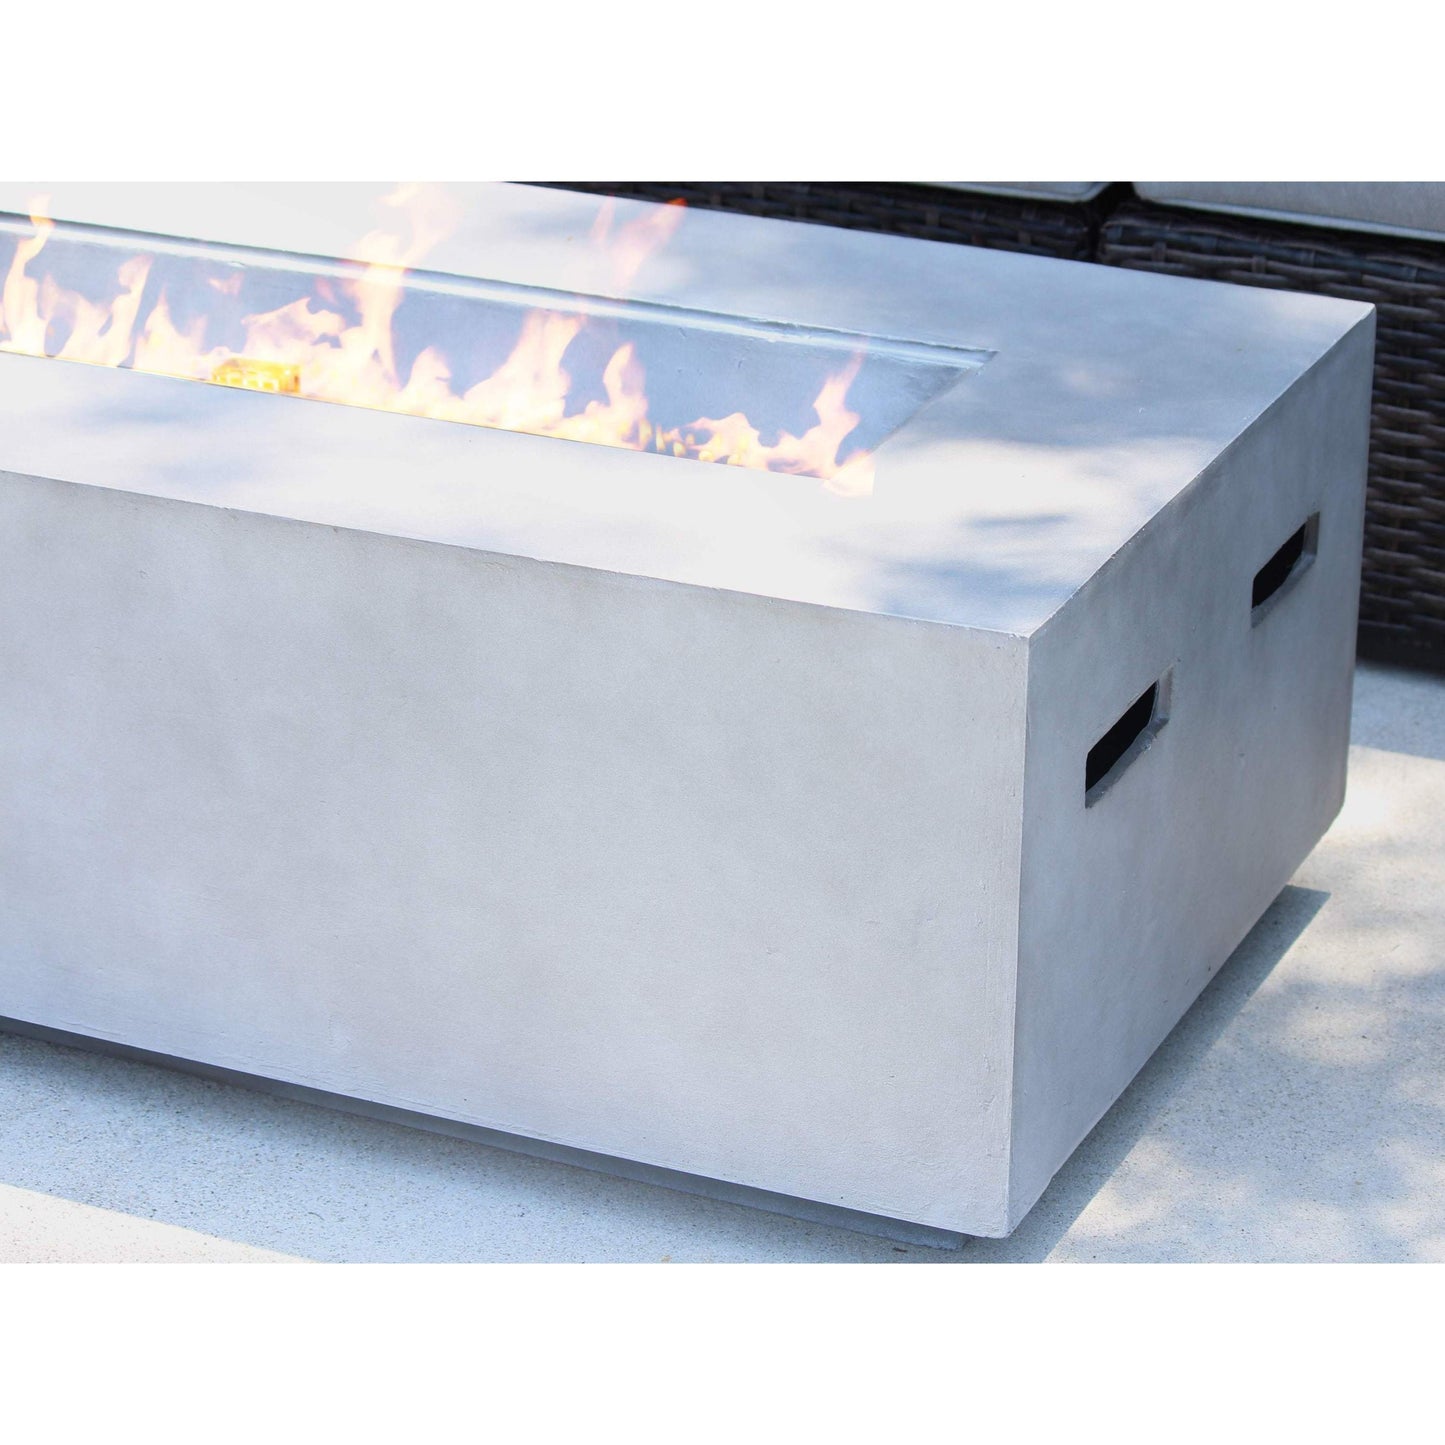 56-inch Modern Concrete Propane Outdoor Fire Pit Table by Living Source International